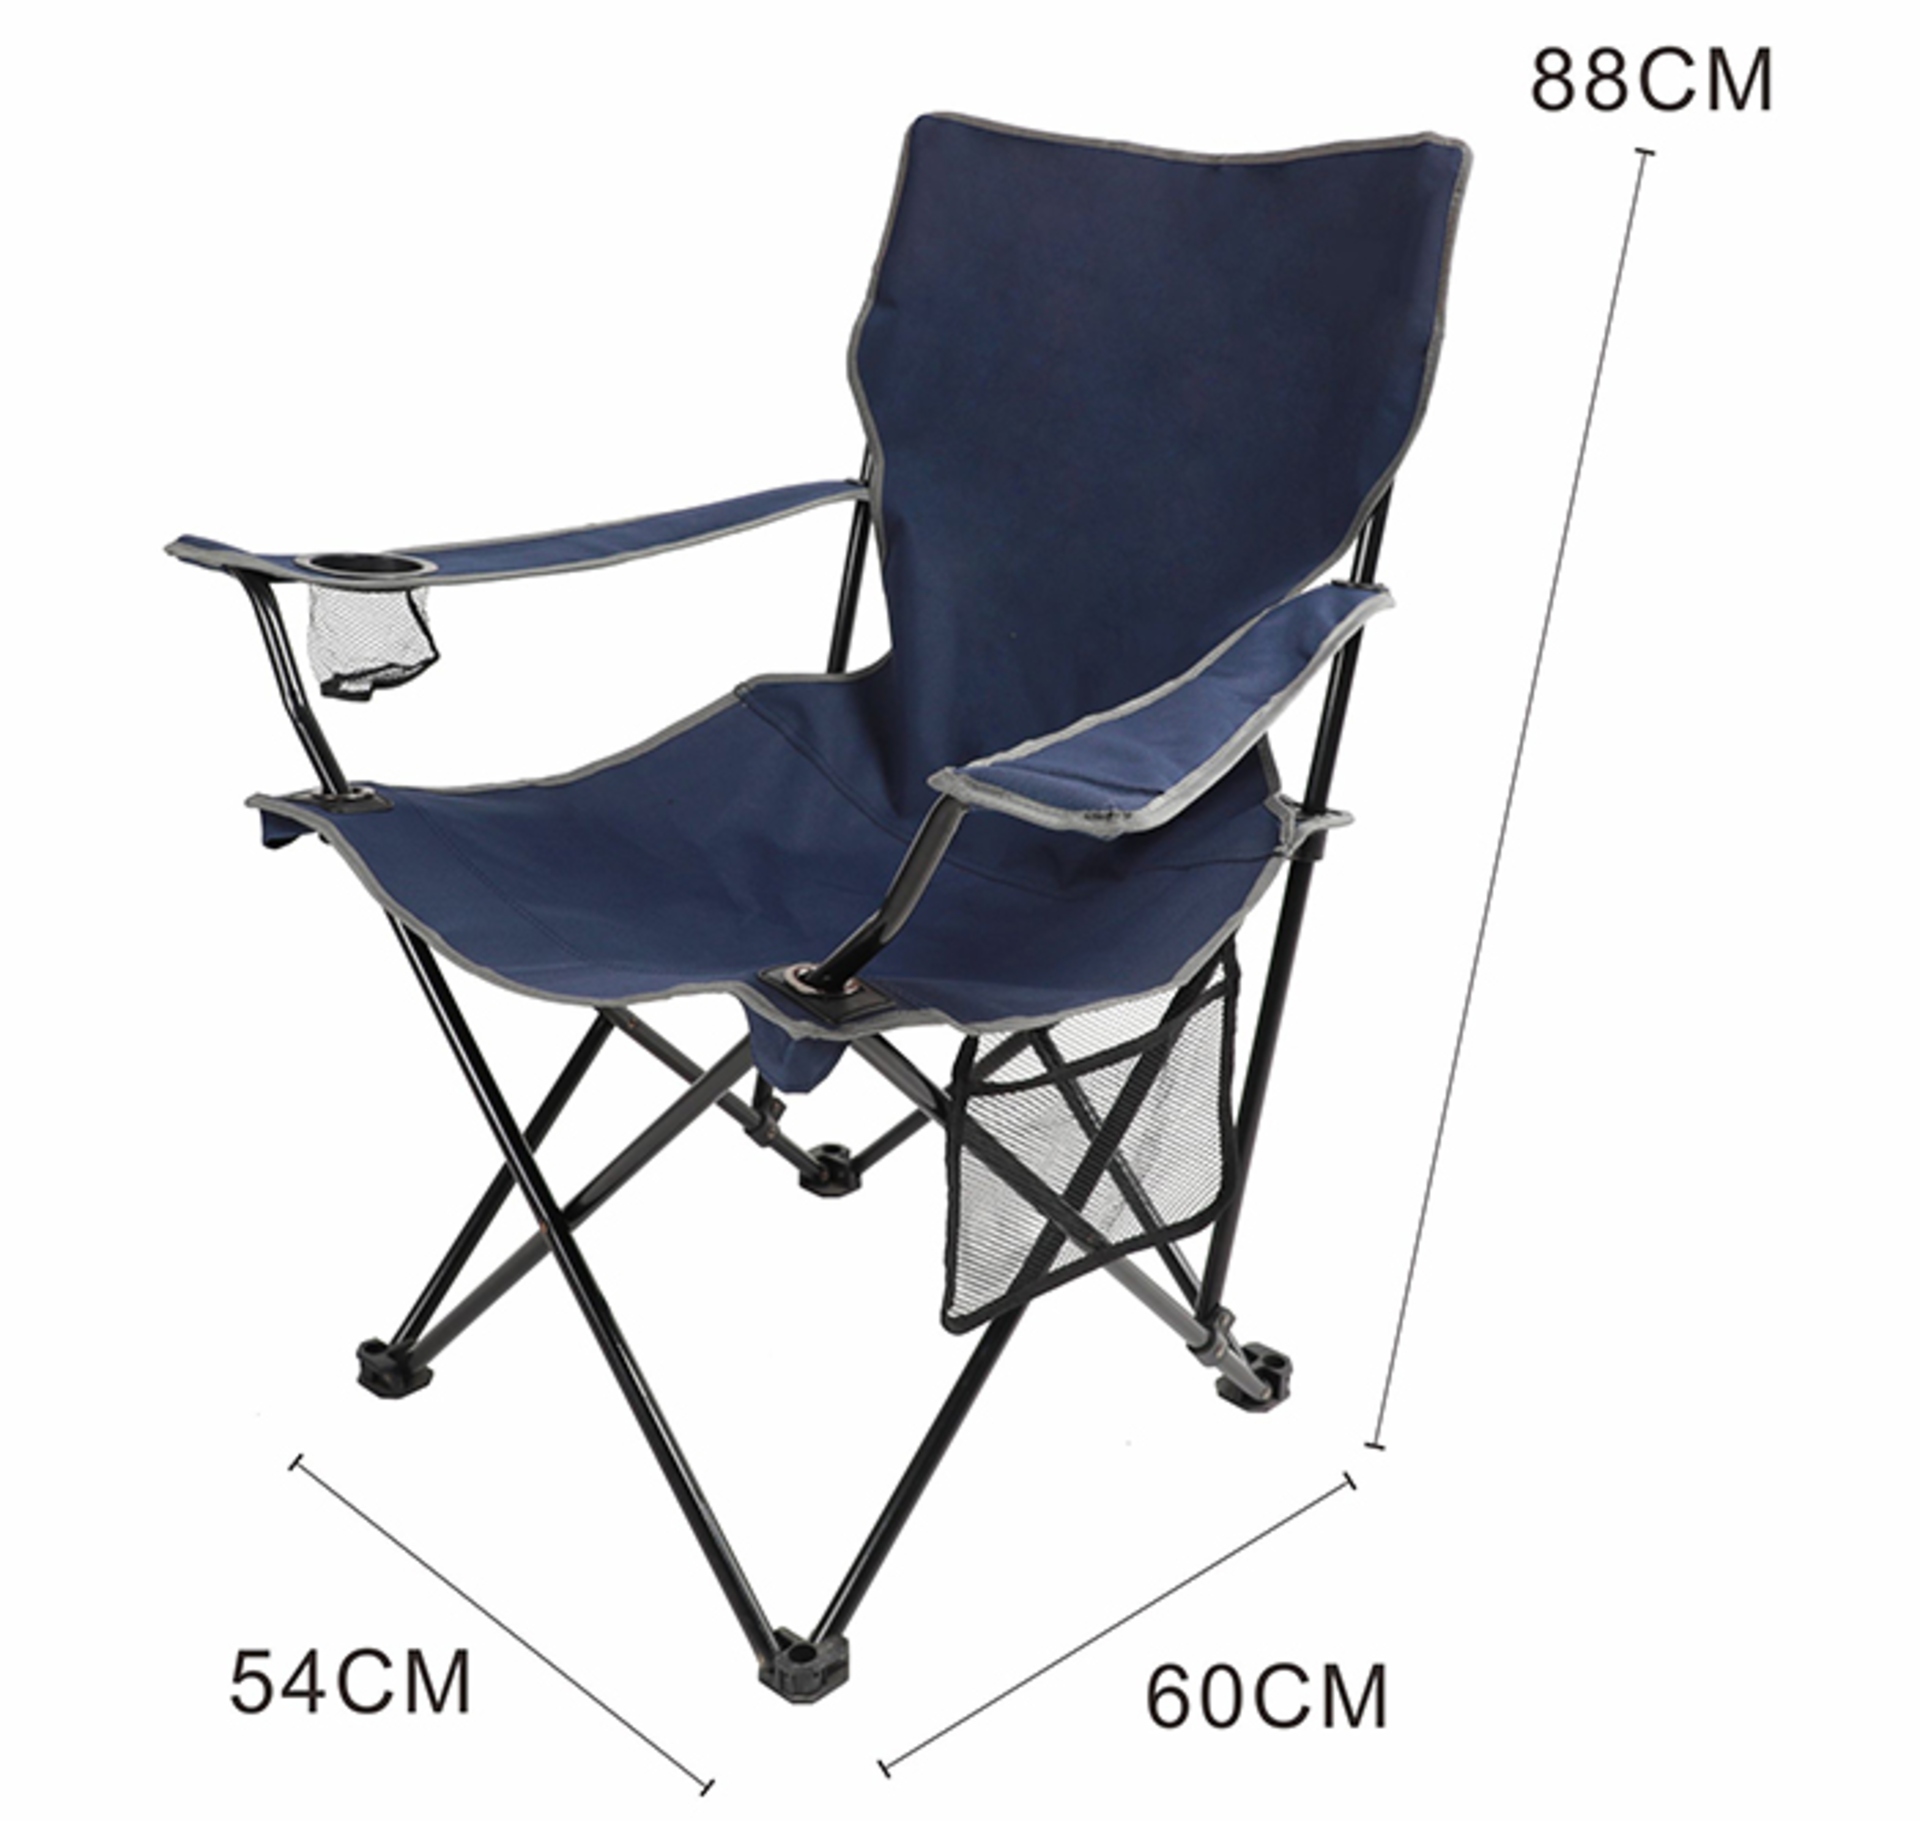 UNITS - RBSM CAMPING FOLDING CHAIRS W/ CARRYING BAGS - NAVY BLUE (NEW) (MSRP $75) - Image 4 of 4